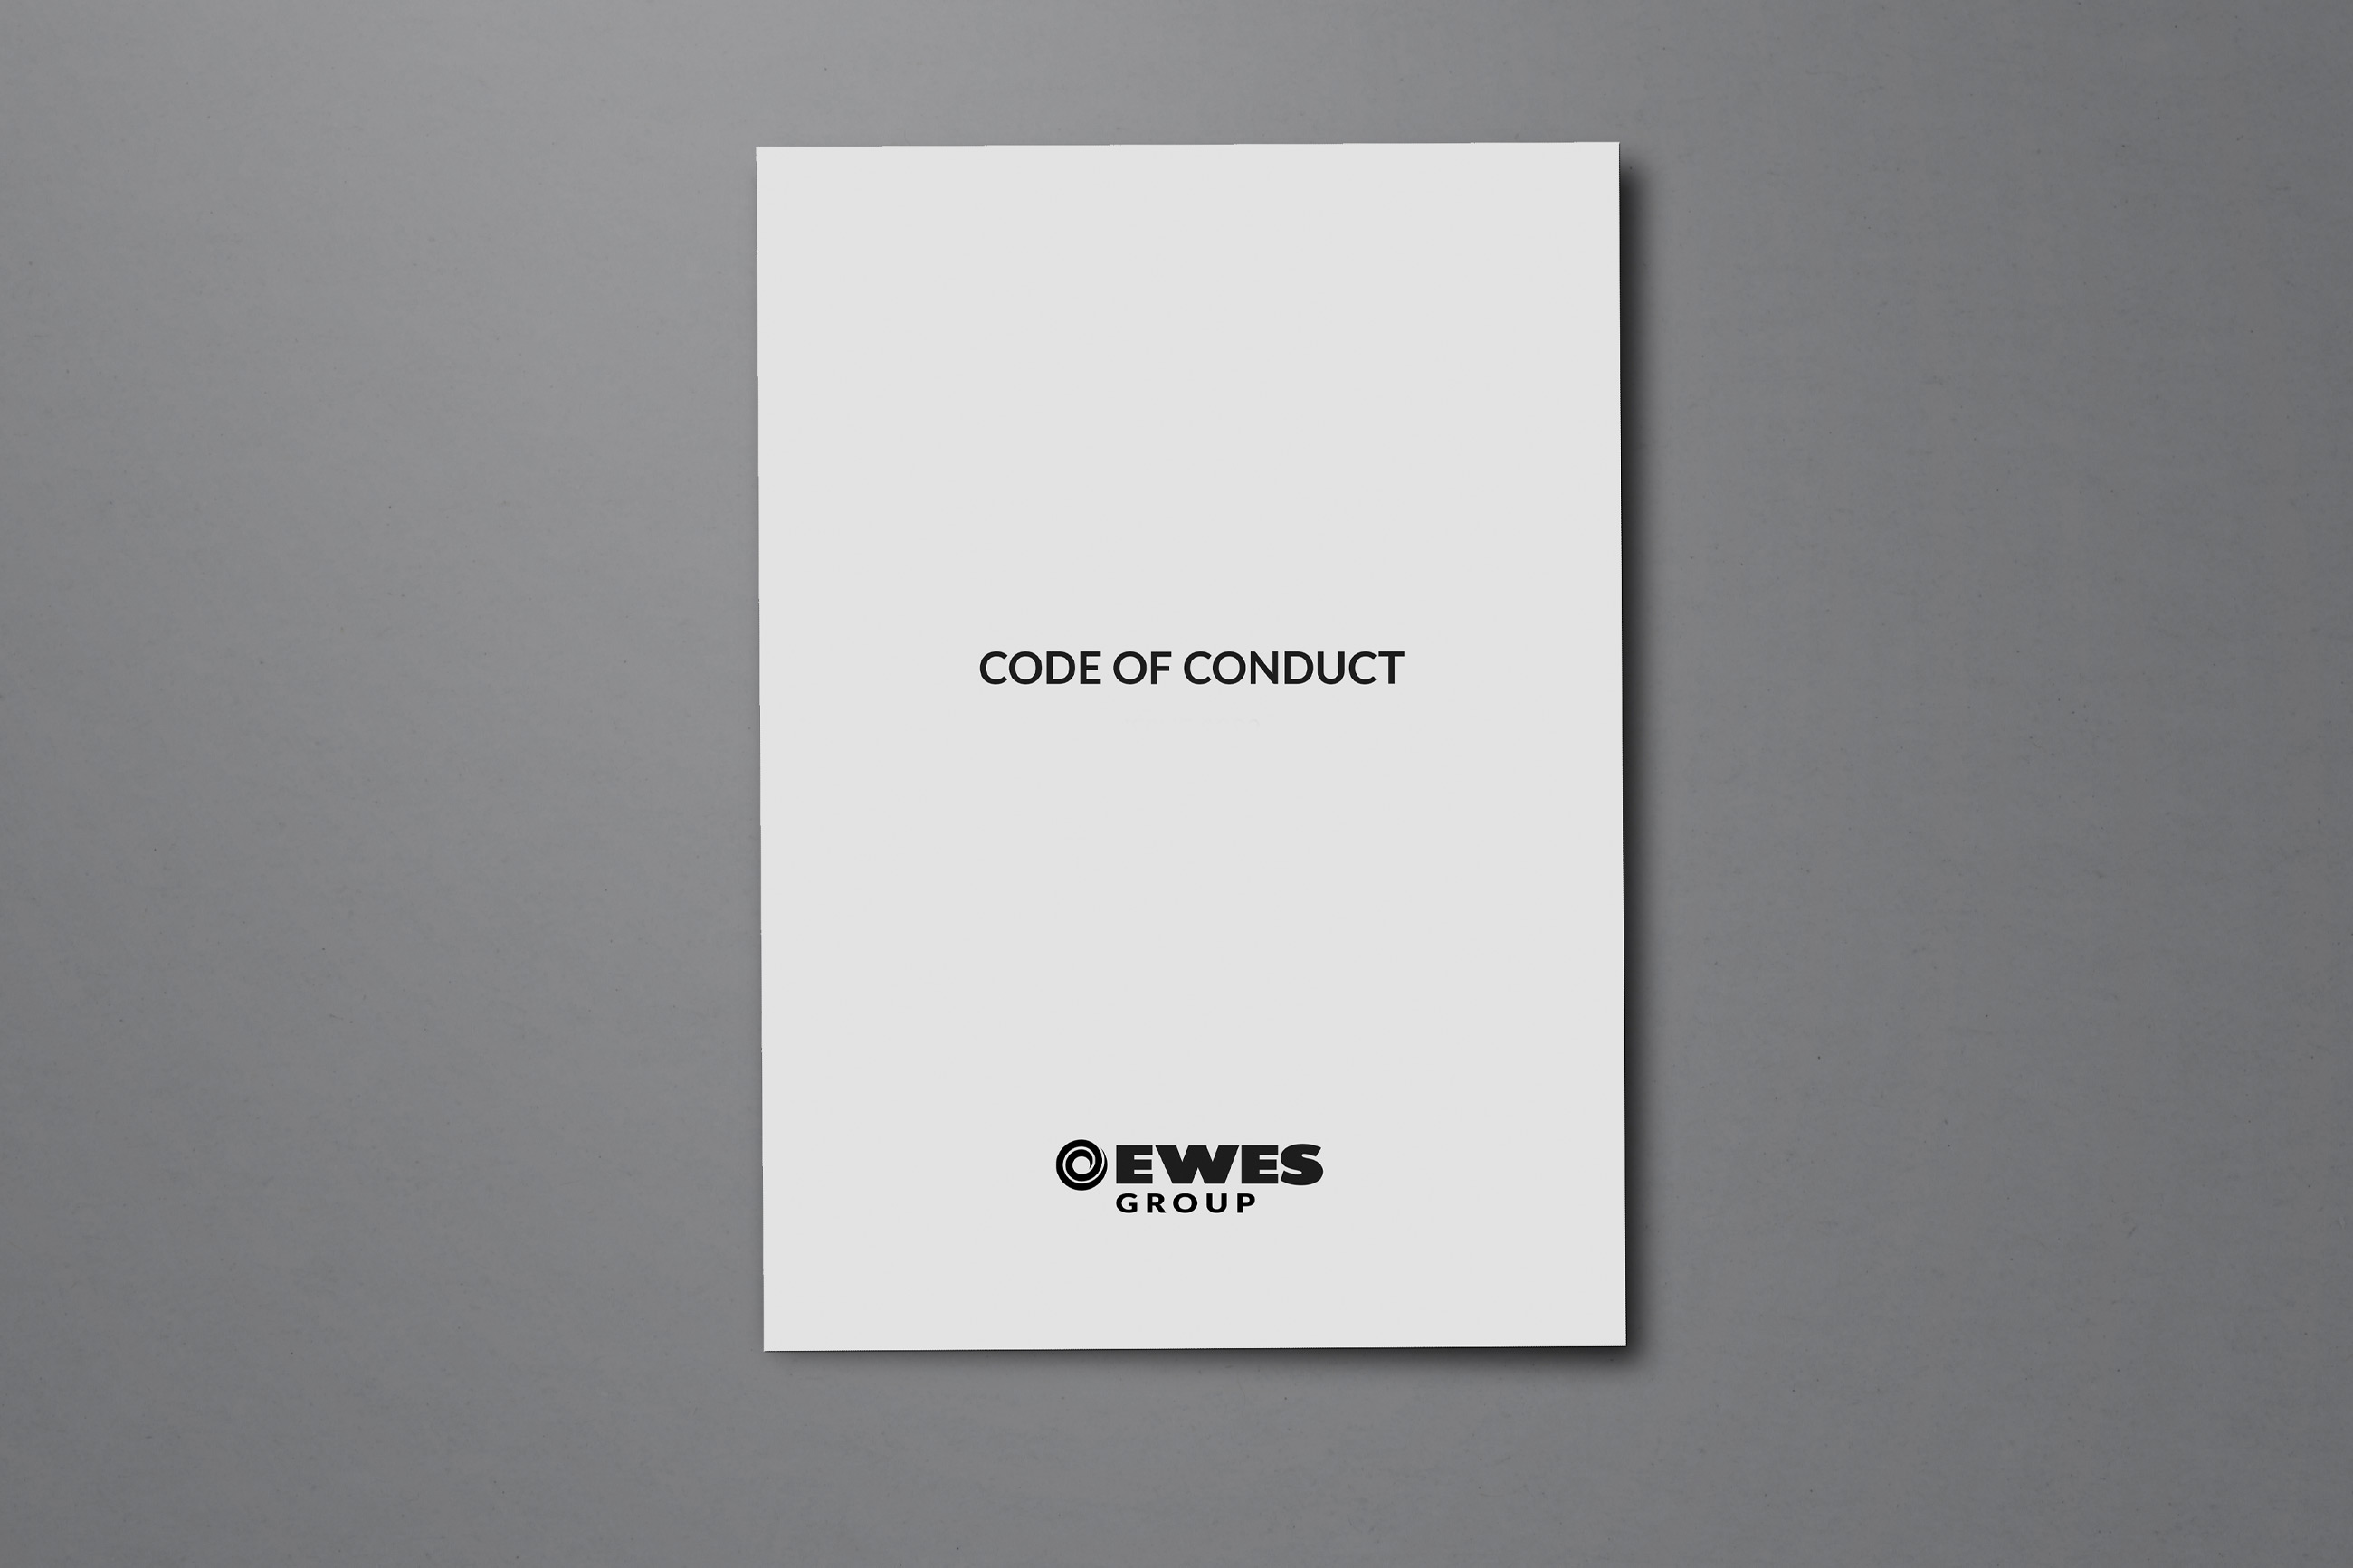 EWES Code of conduct